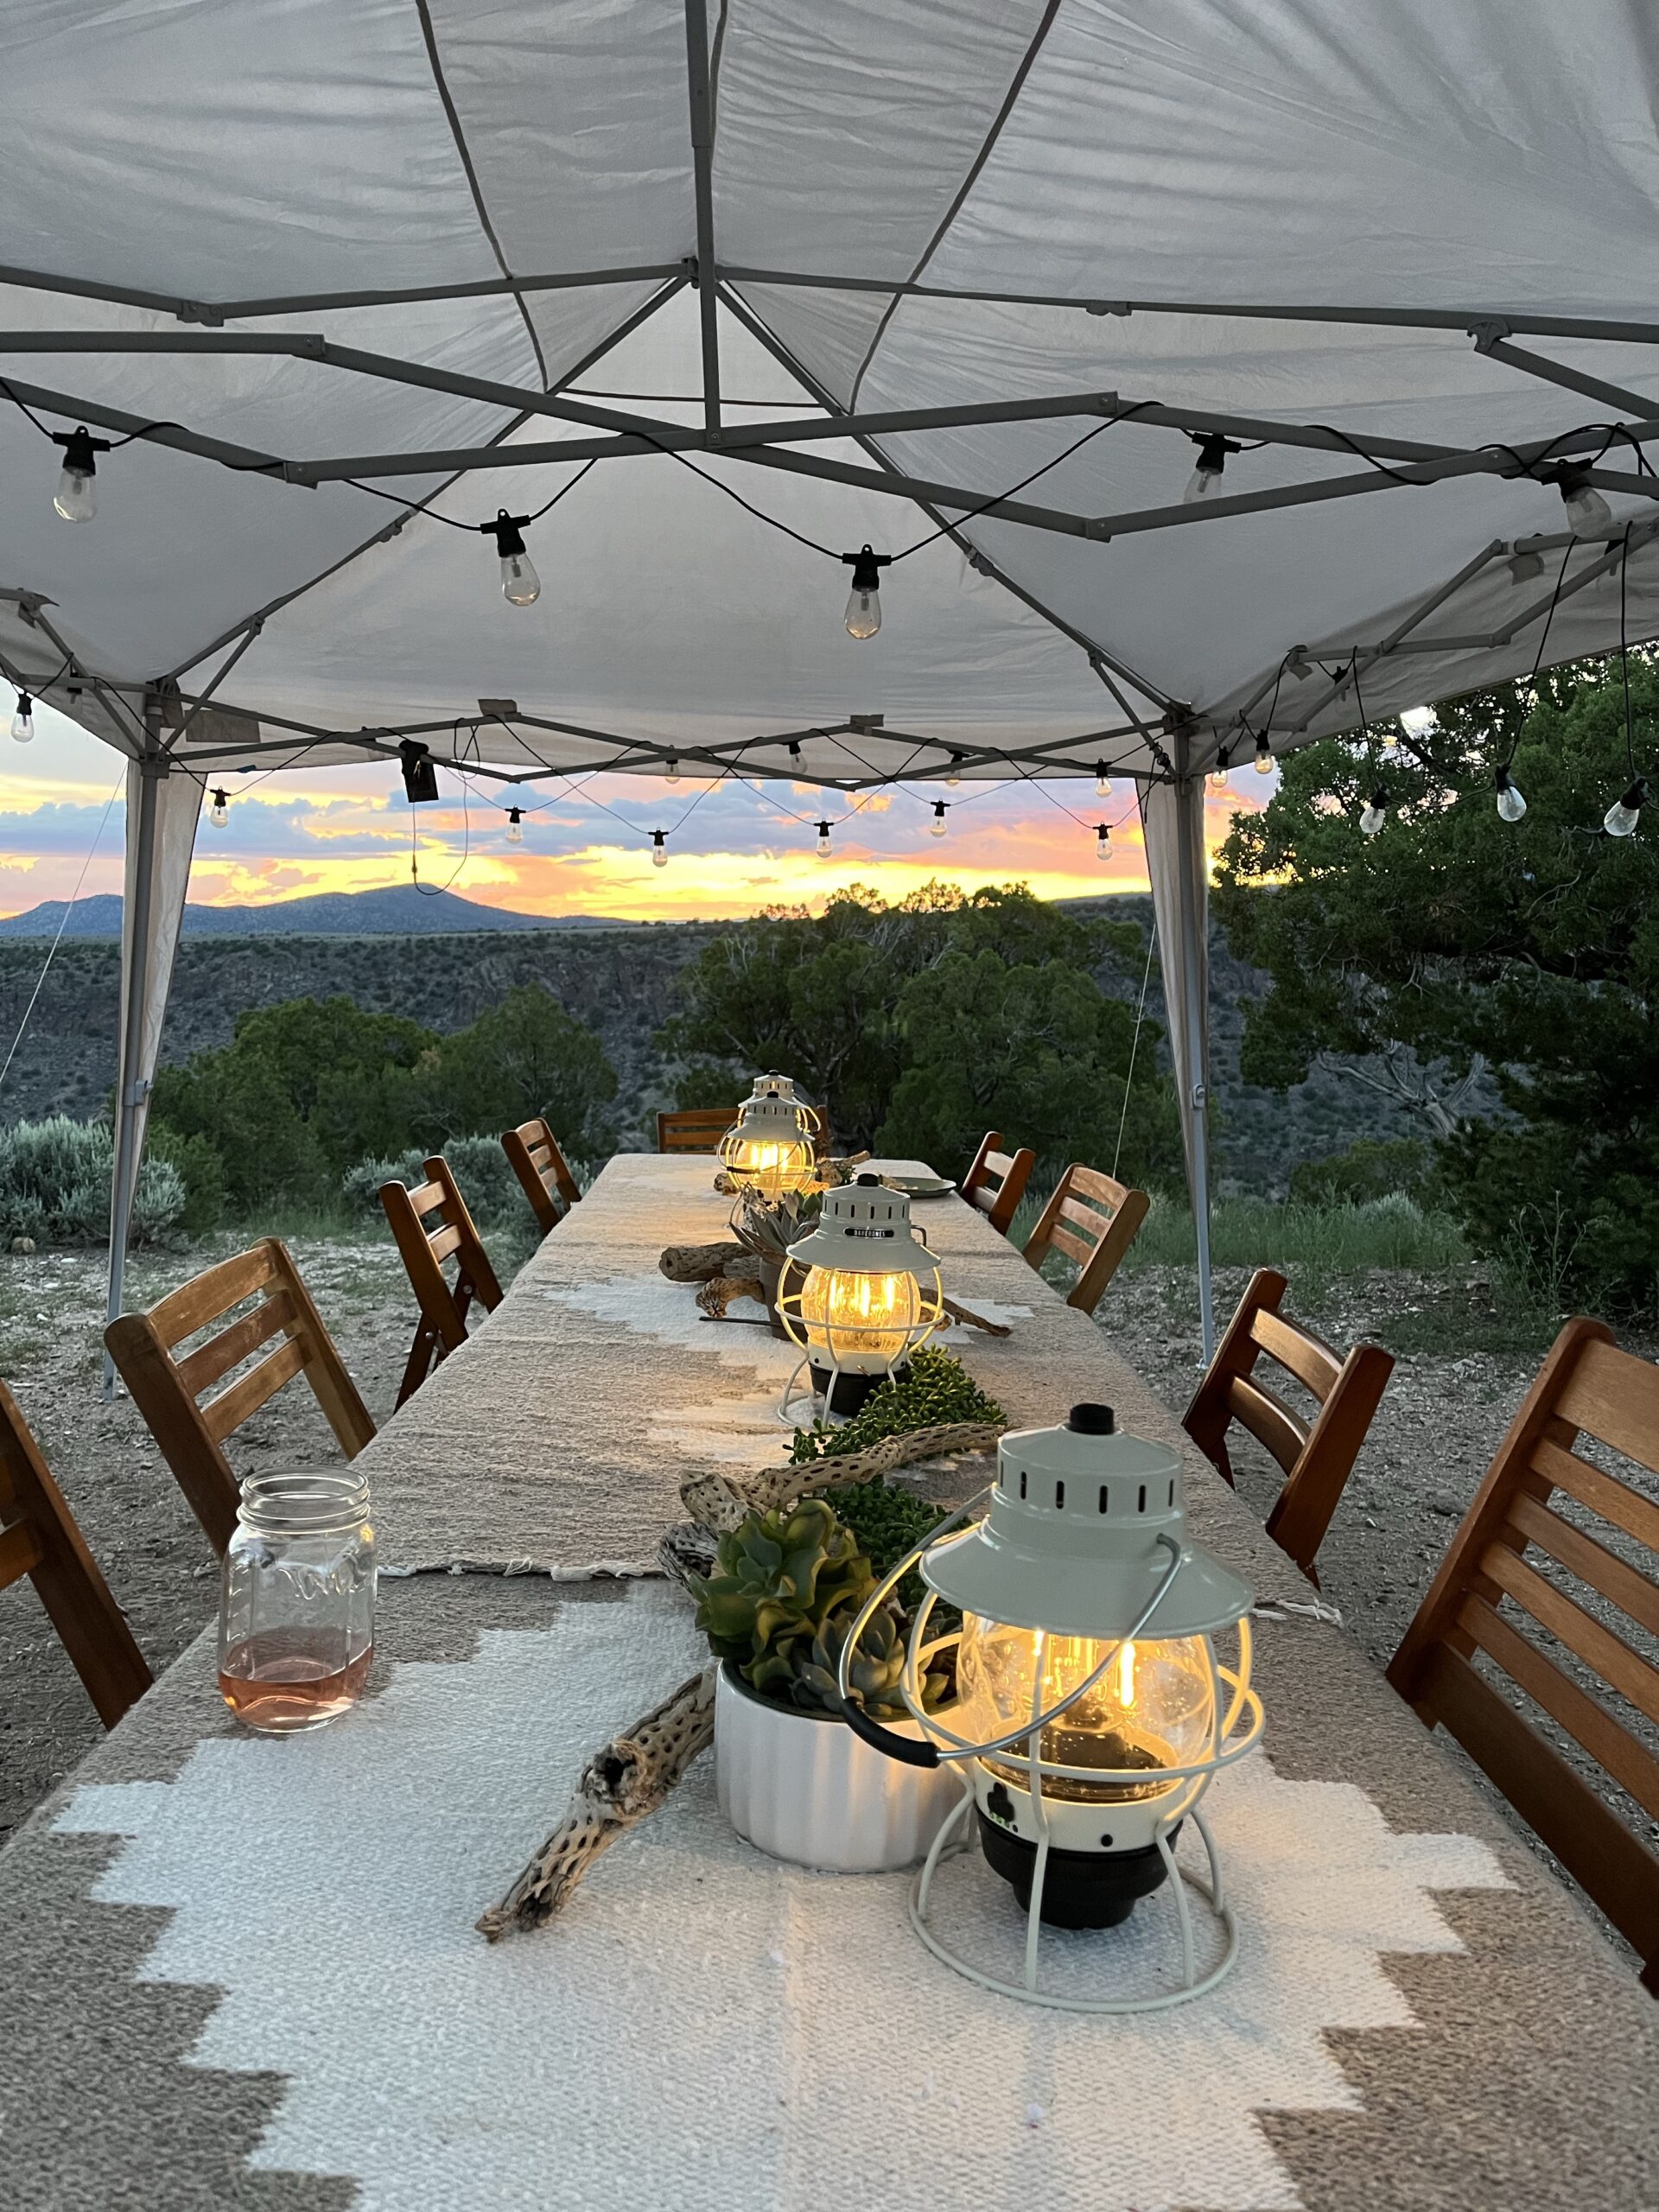 Long table under white tent with lights strung across with a scenic mountainous background and sunset